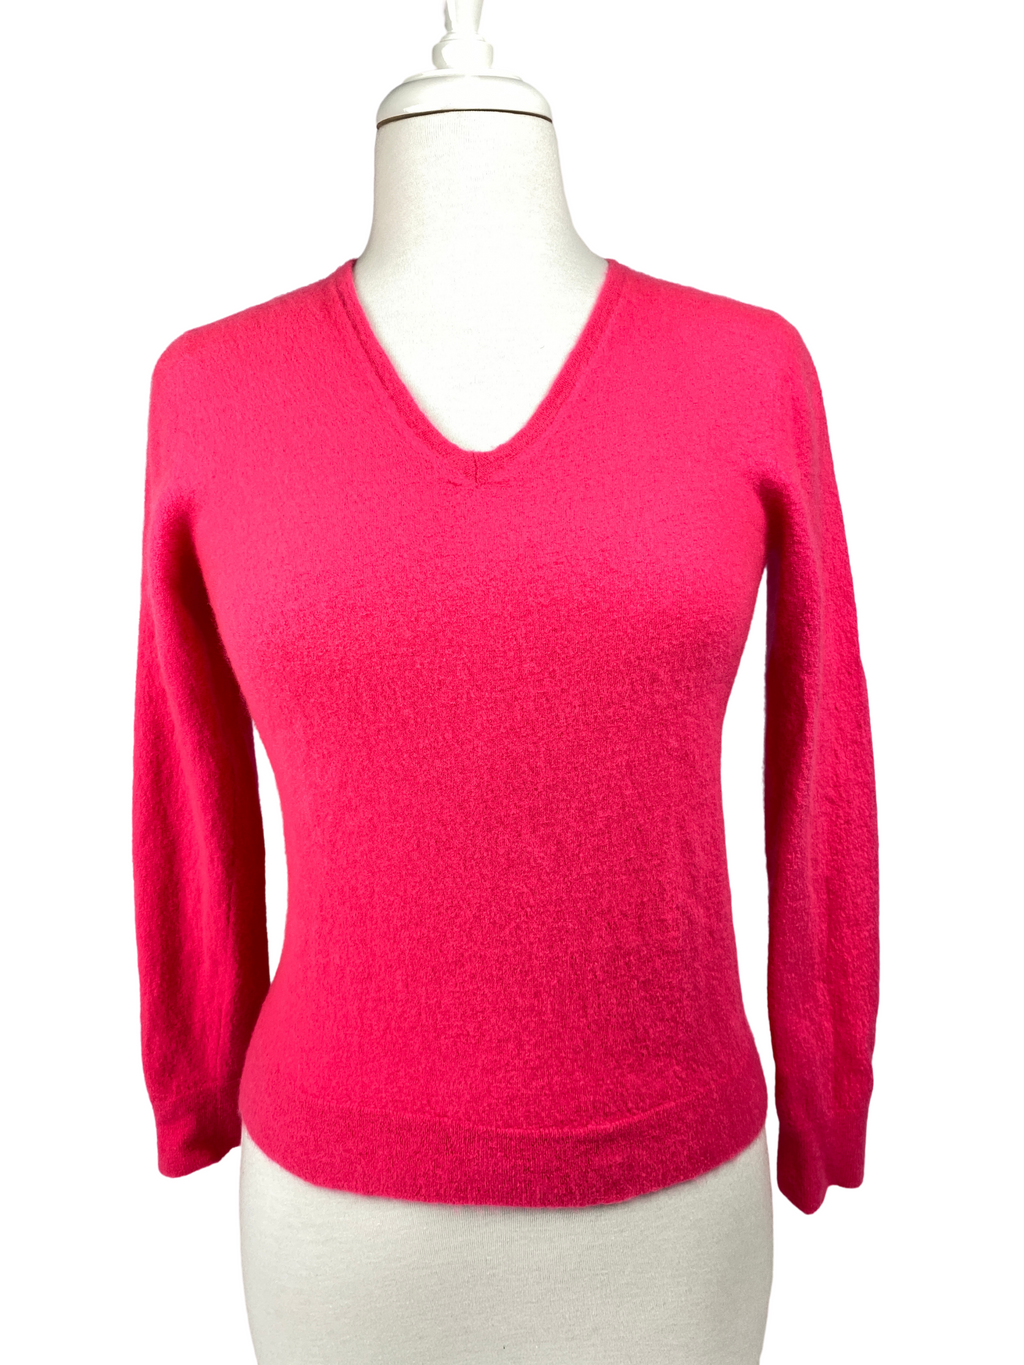 GUCCI -100% CASHMERE V NECK SWEATER IN BRIGHT PINK - SZ MED